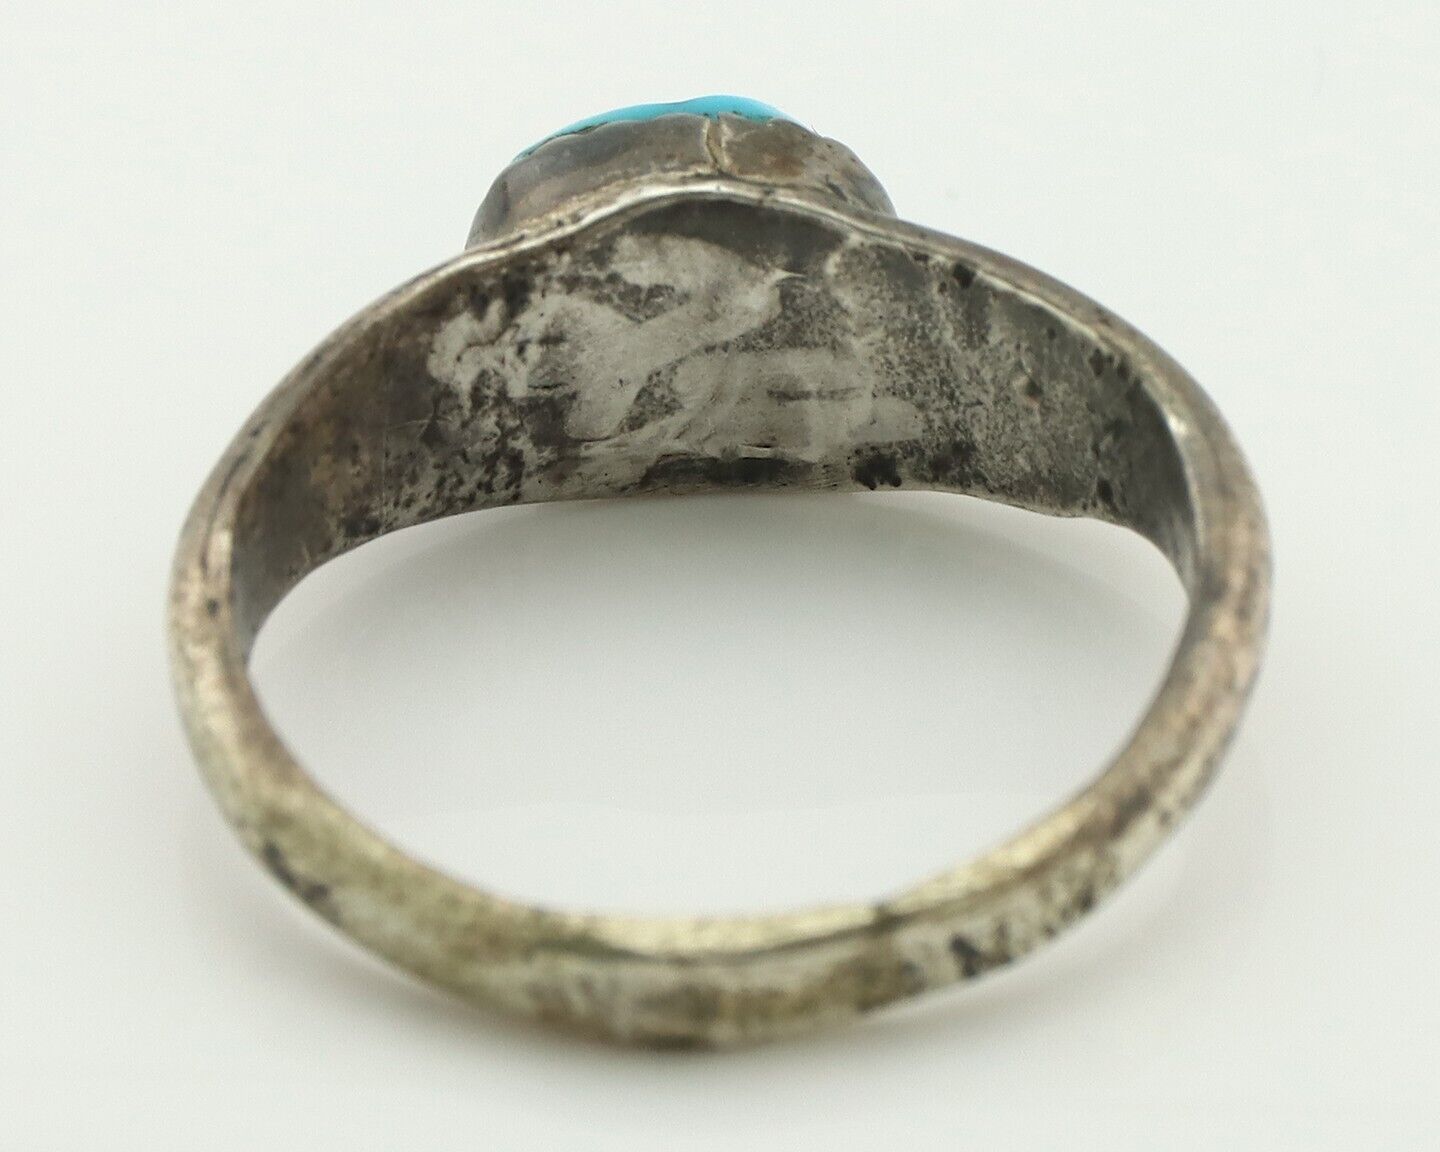 Zuni Ring .925 Silver Natural Blue Turquoise Native American Artist C.80's